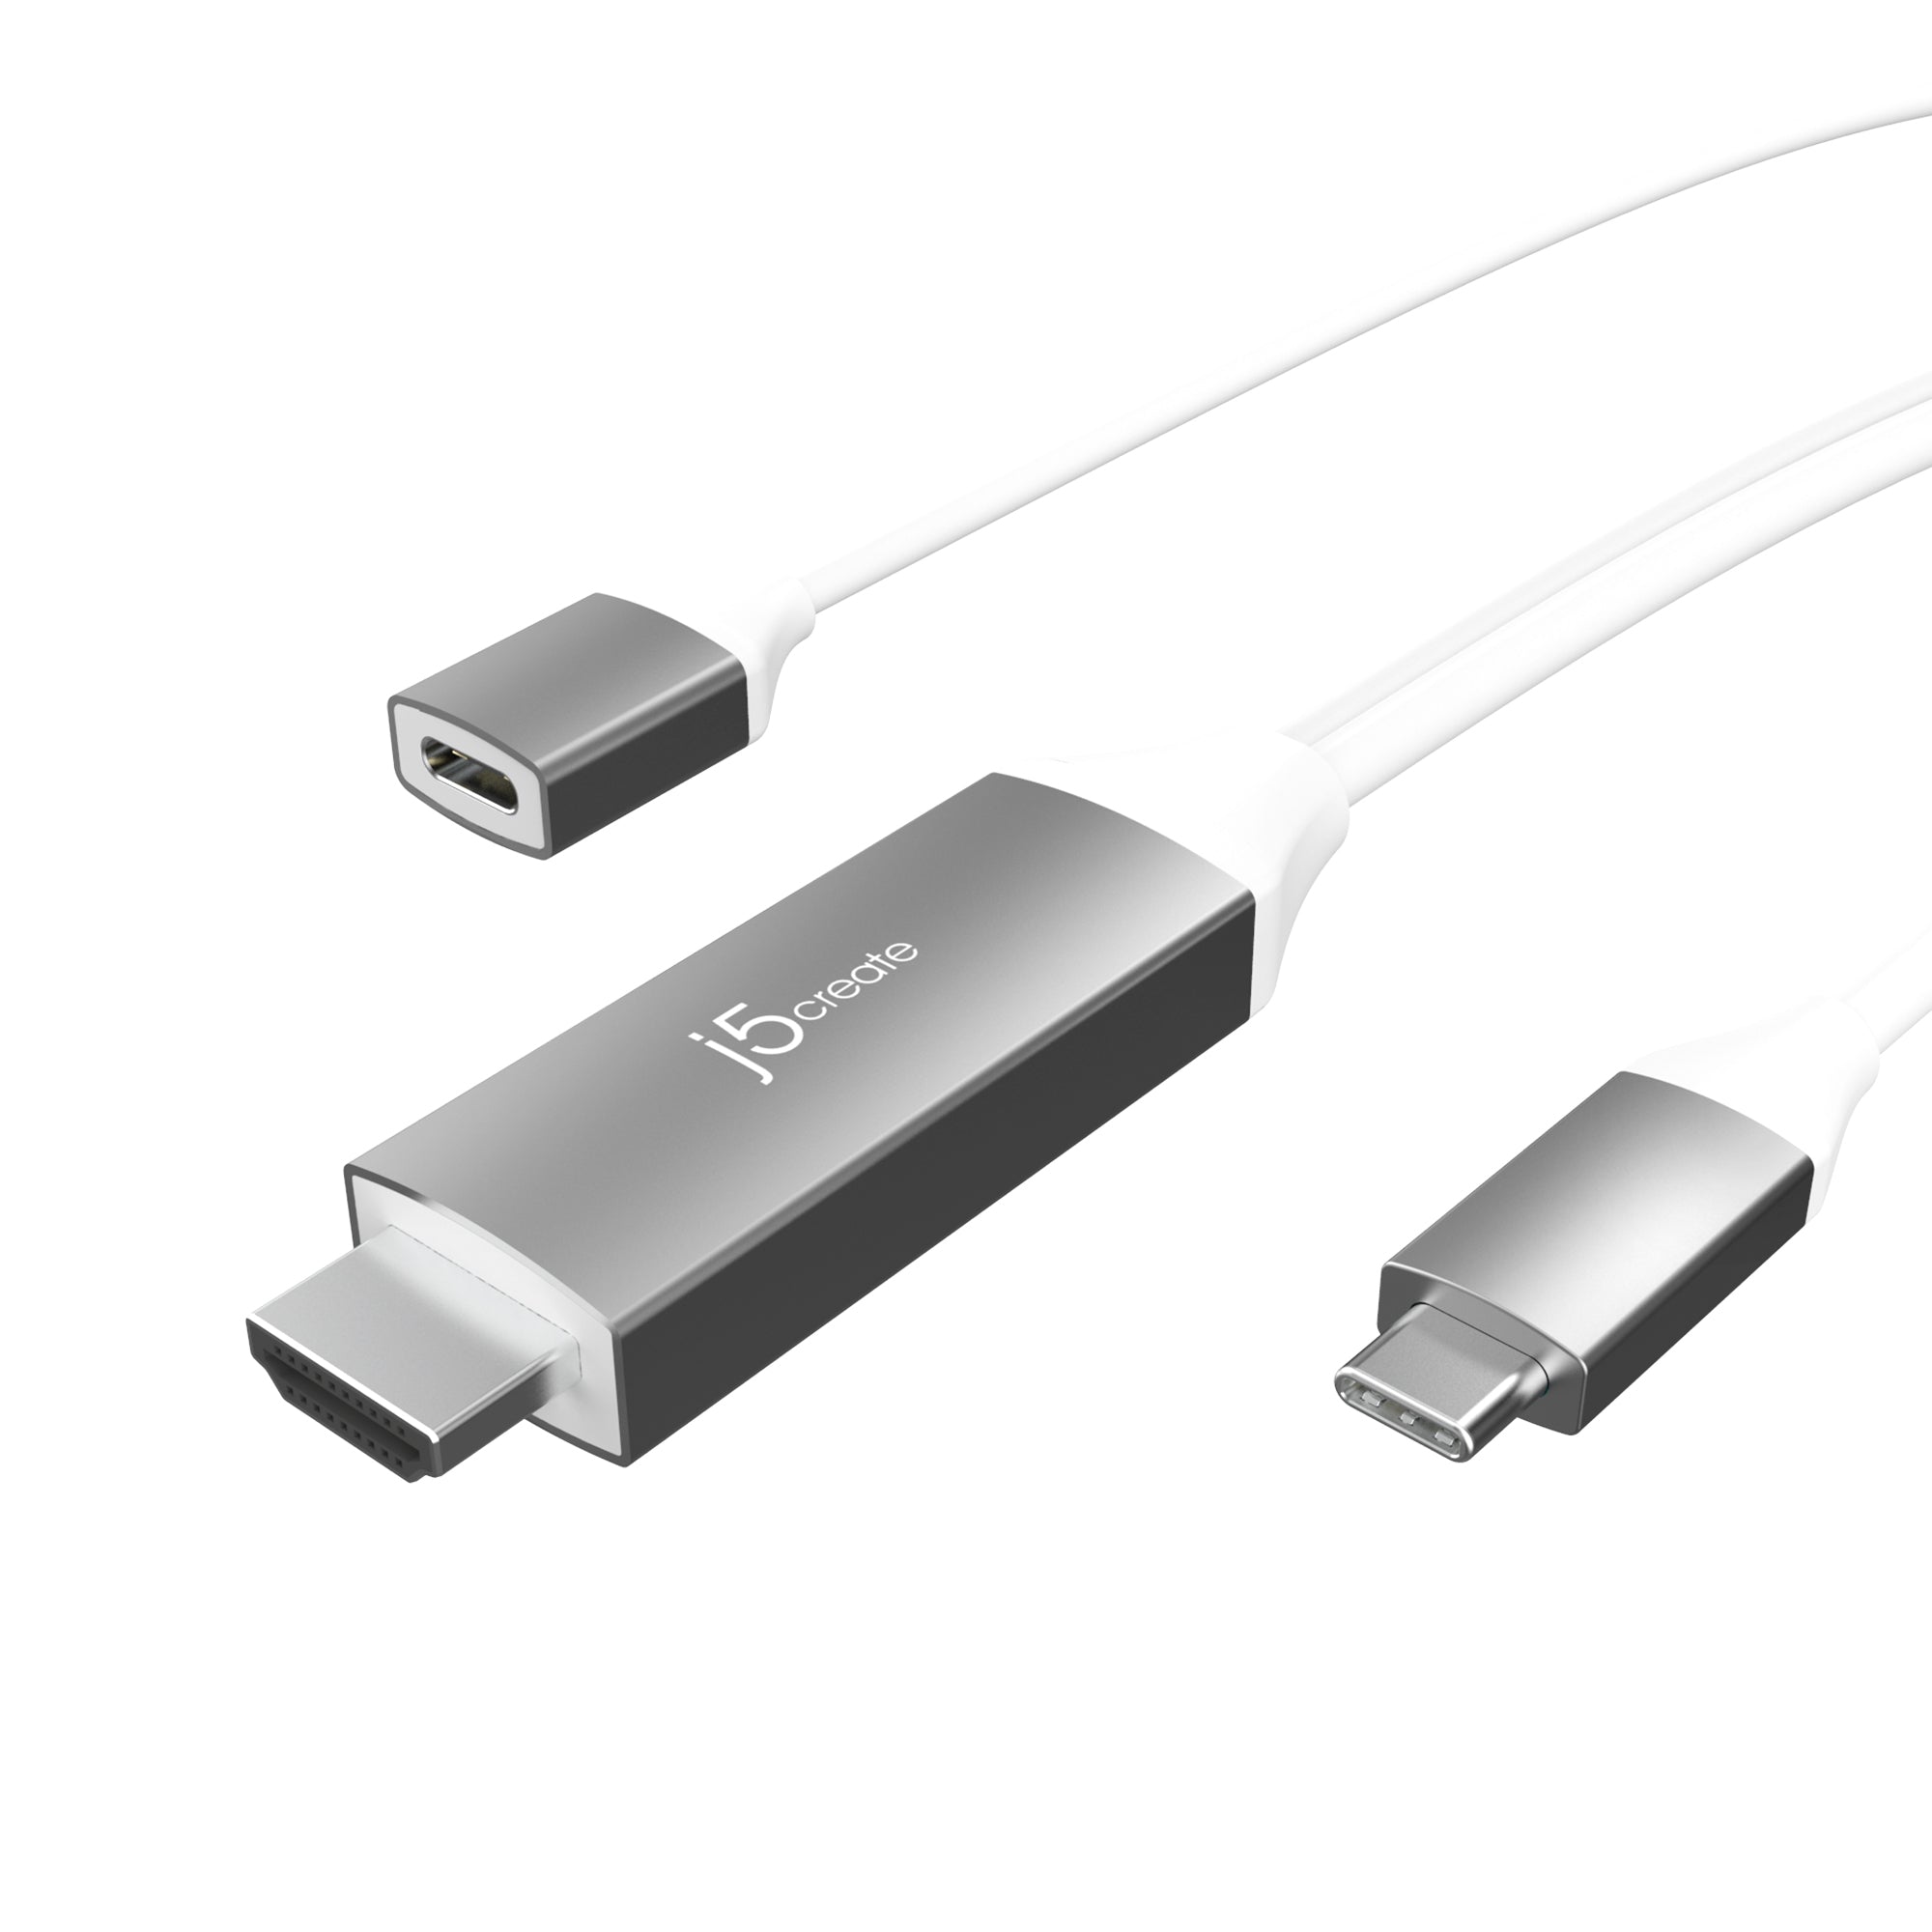 USB-C to HDMI cable for 4K/5K video playback